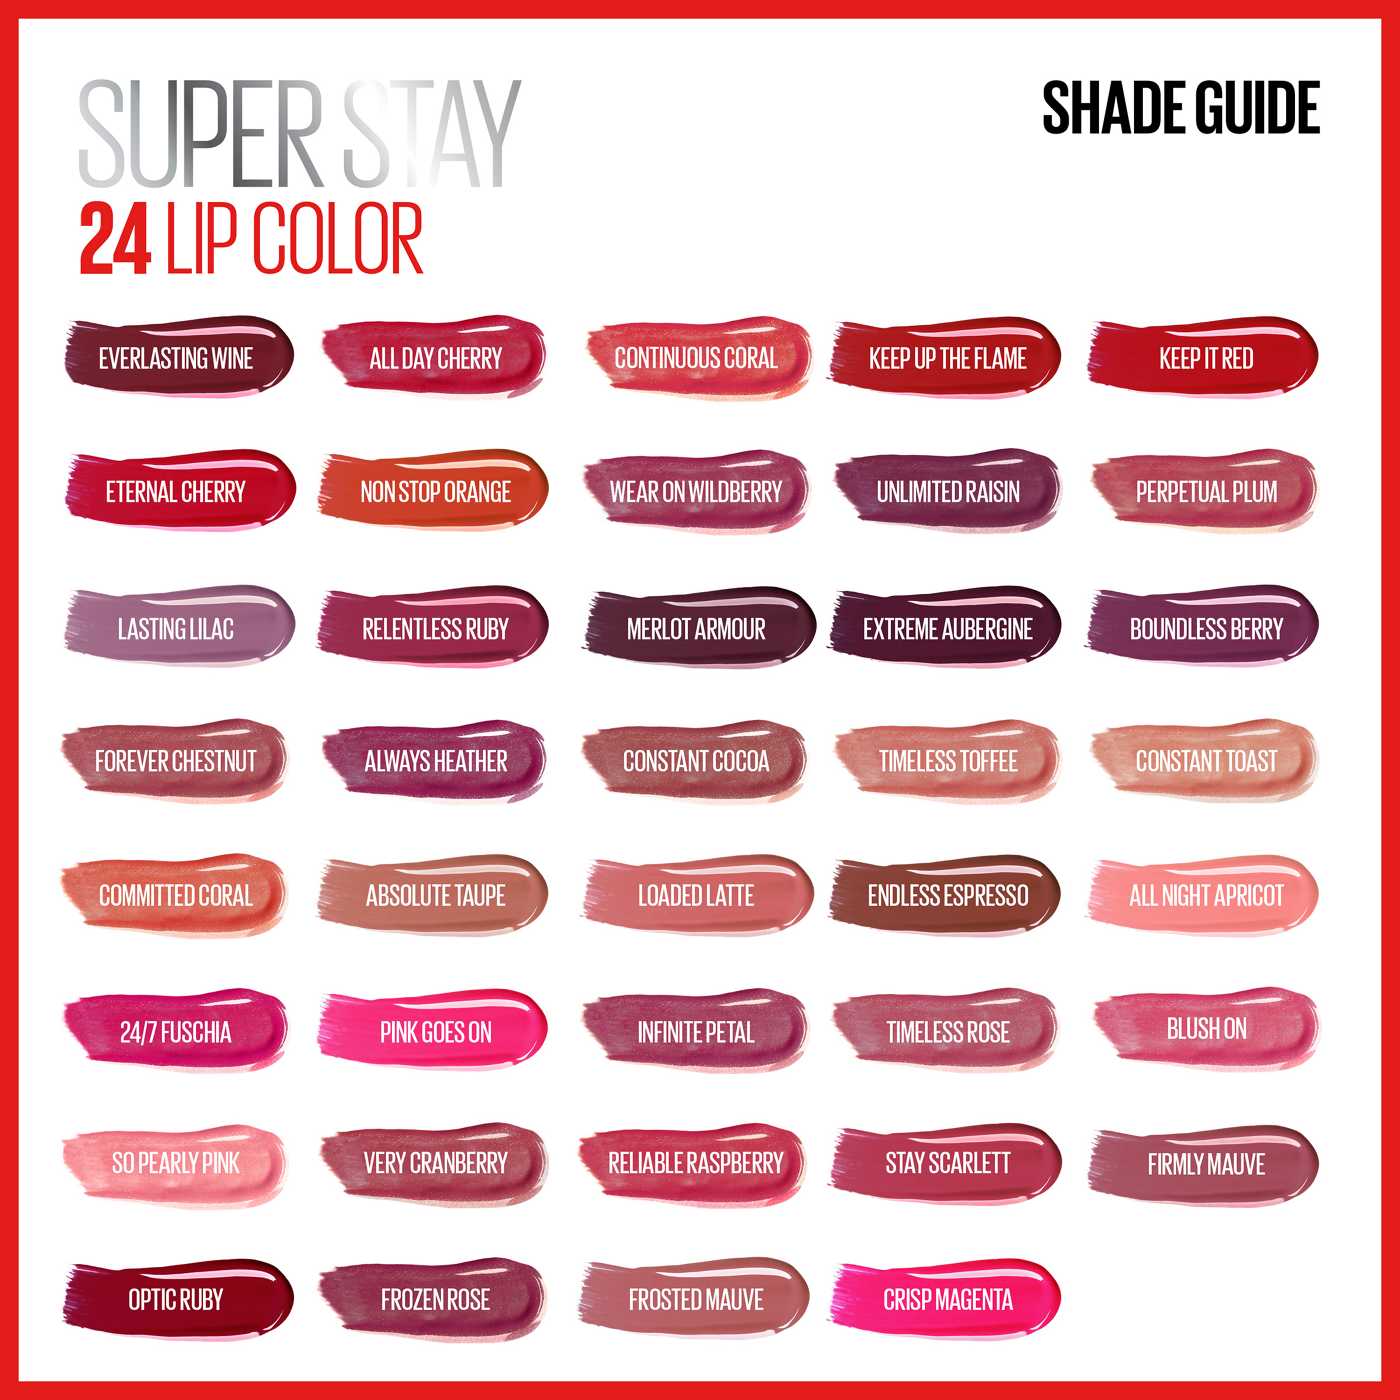 Maybelline Super Stay 24 2-Step Liquid Lipstick - All Night Apricot; image 5 of 5